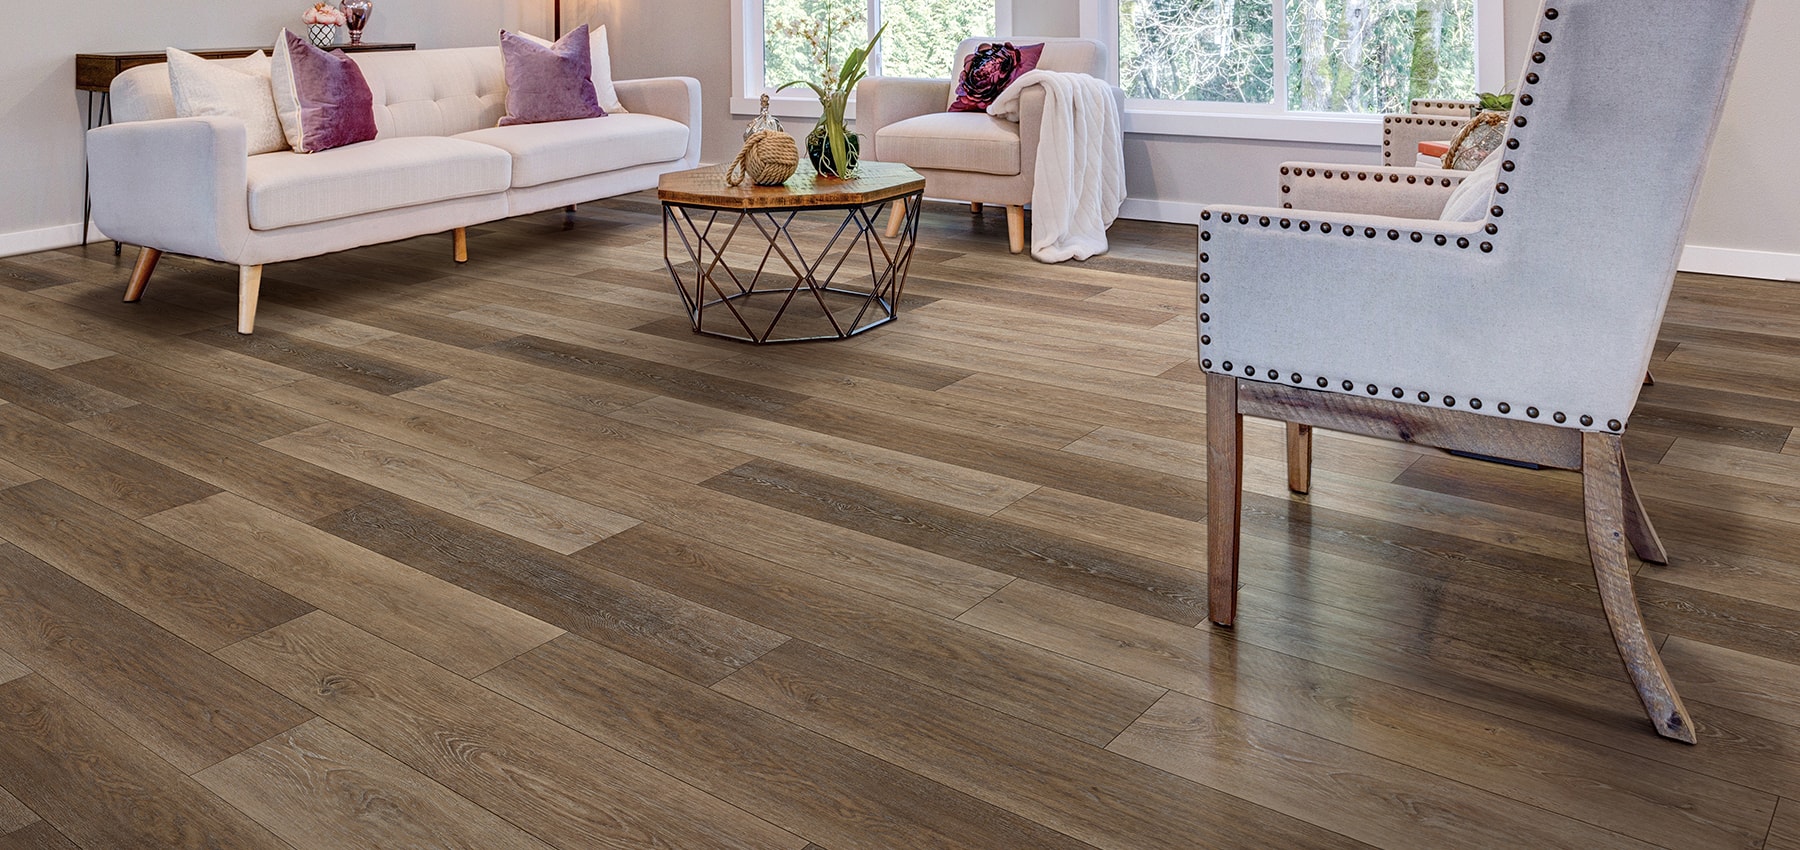 Great Lakes Flooring | Quality. Service. Innovation. | Home